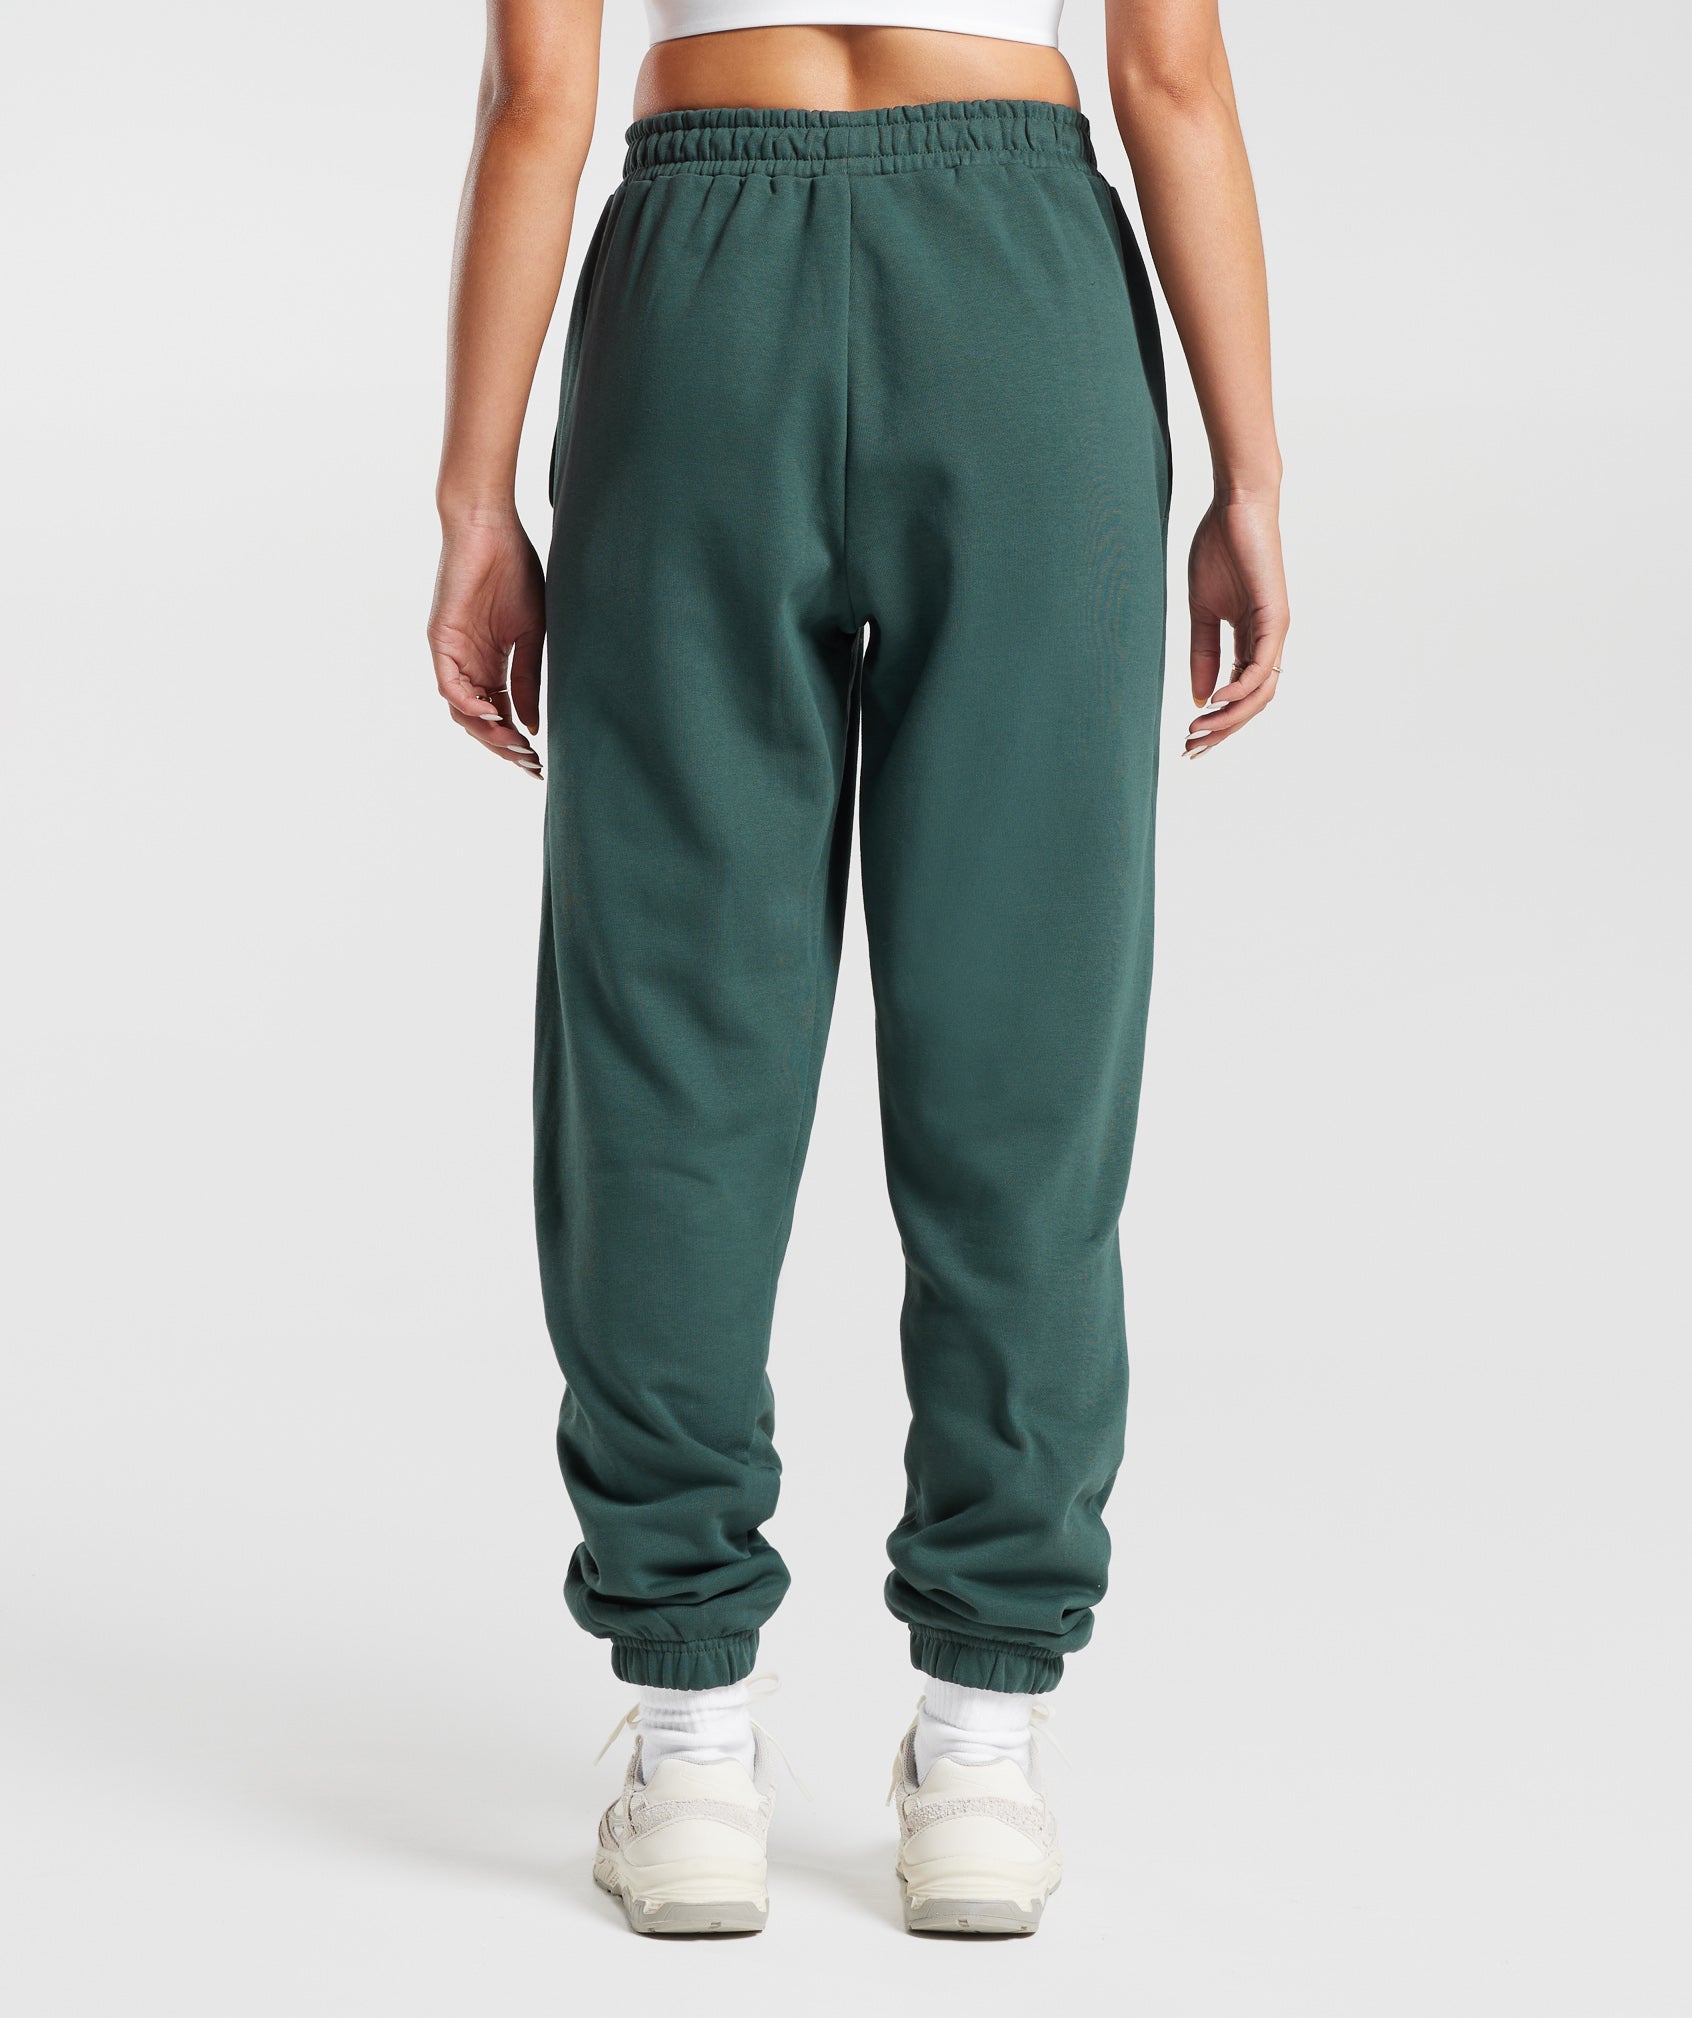 Women's Gymshark Recess Track training trousers cactus green